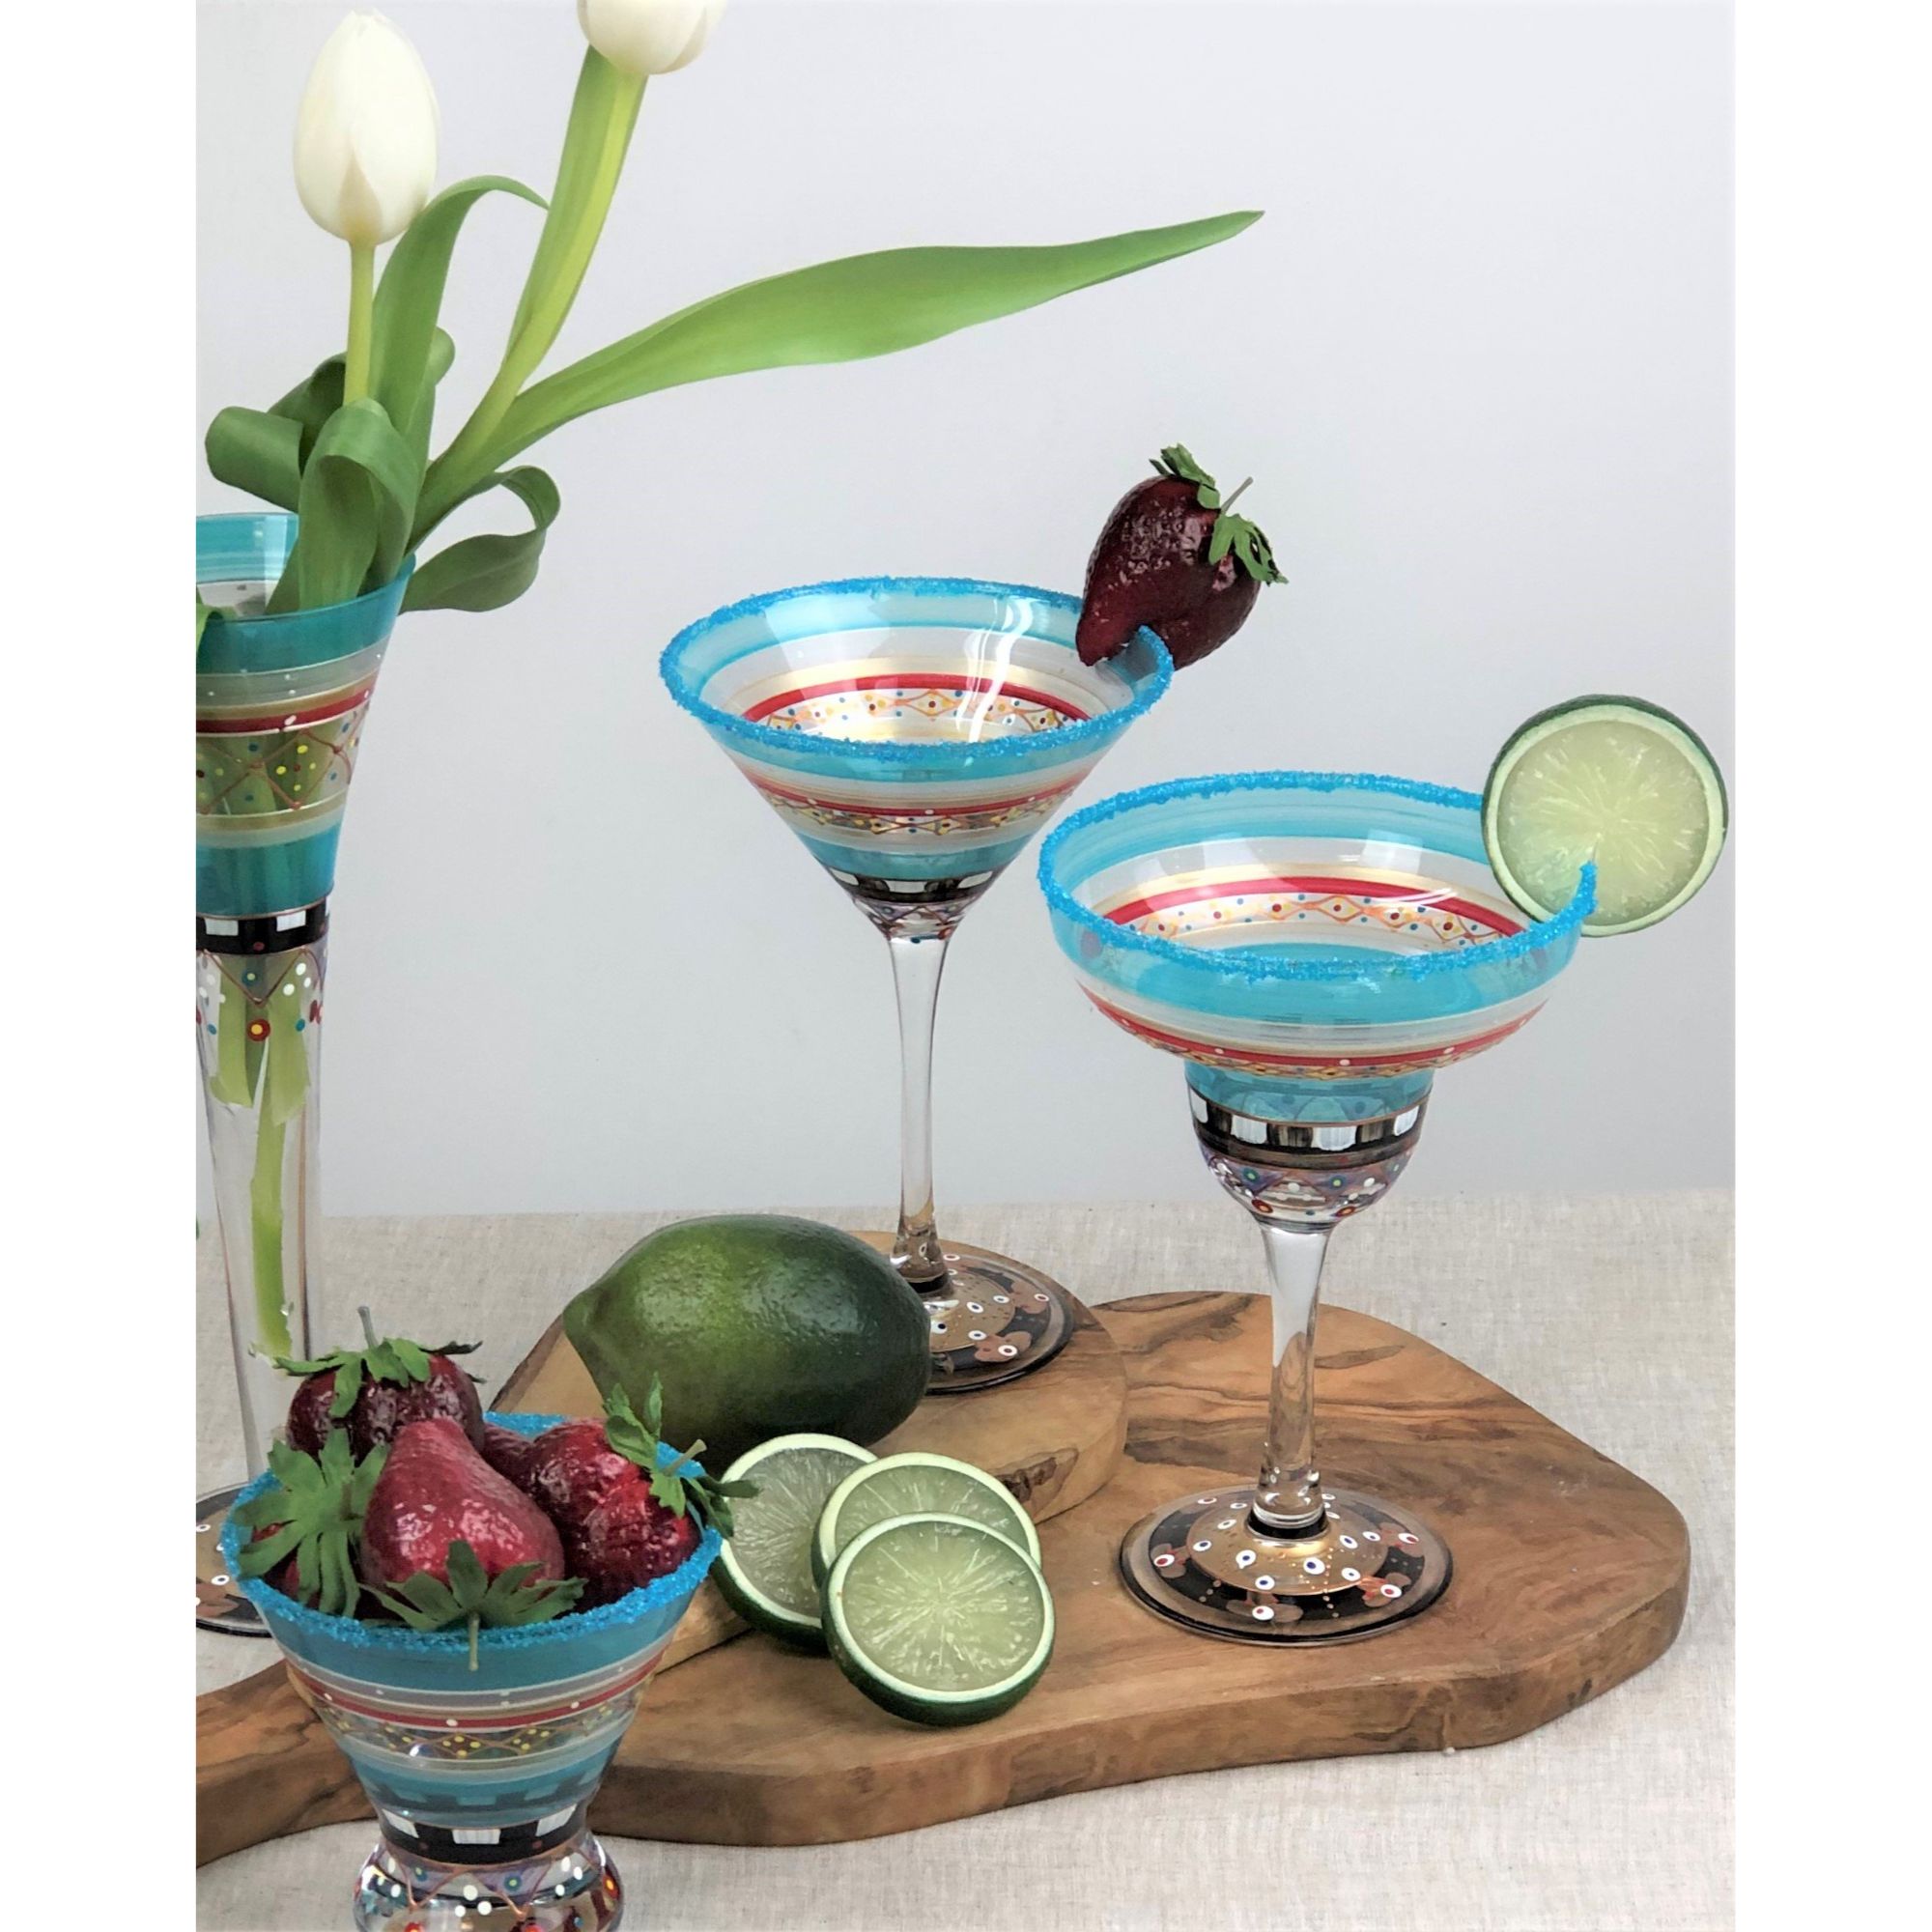 Crafted Creations Set of 2 Blue Mosaic Carnival Confetti Hand Painted Margarita Drinking Glasses 7"